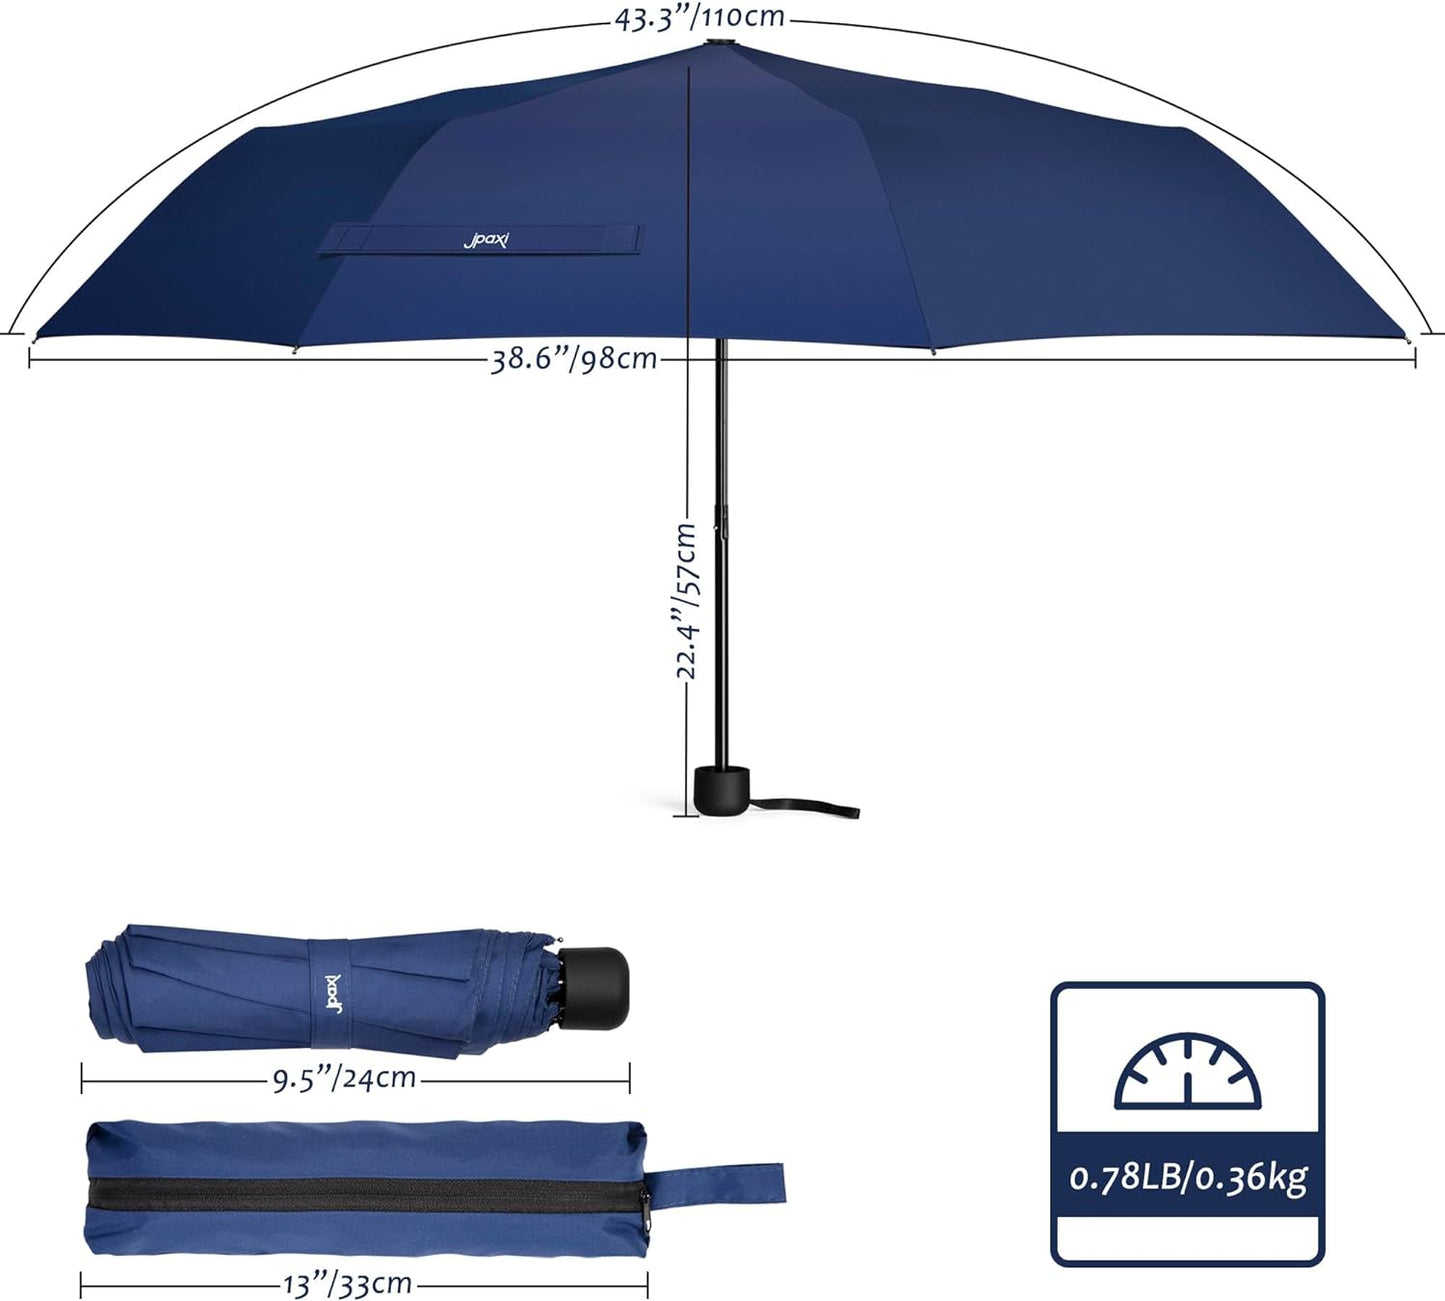 JPAXI 2-in-1 Compact Umbrella & Shopping Bag | Seamless Shift from Rain to Retail